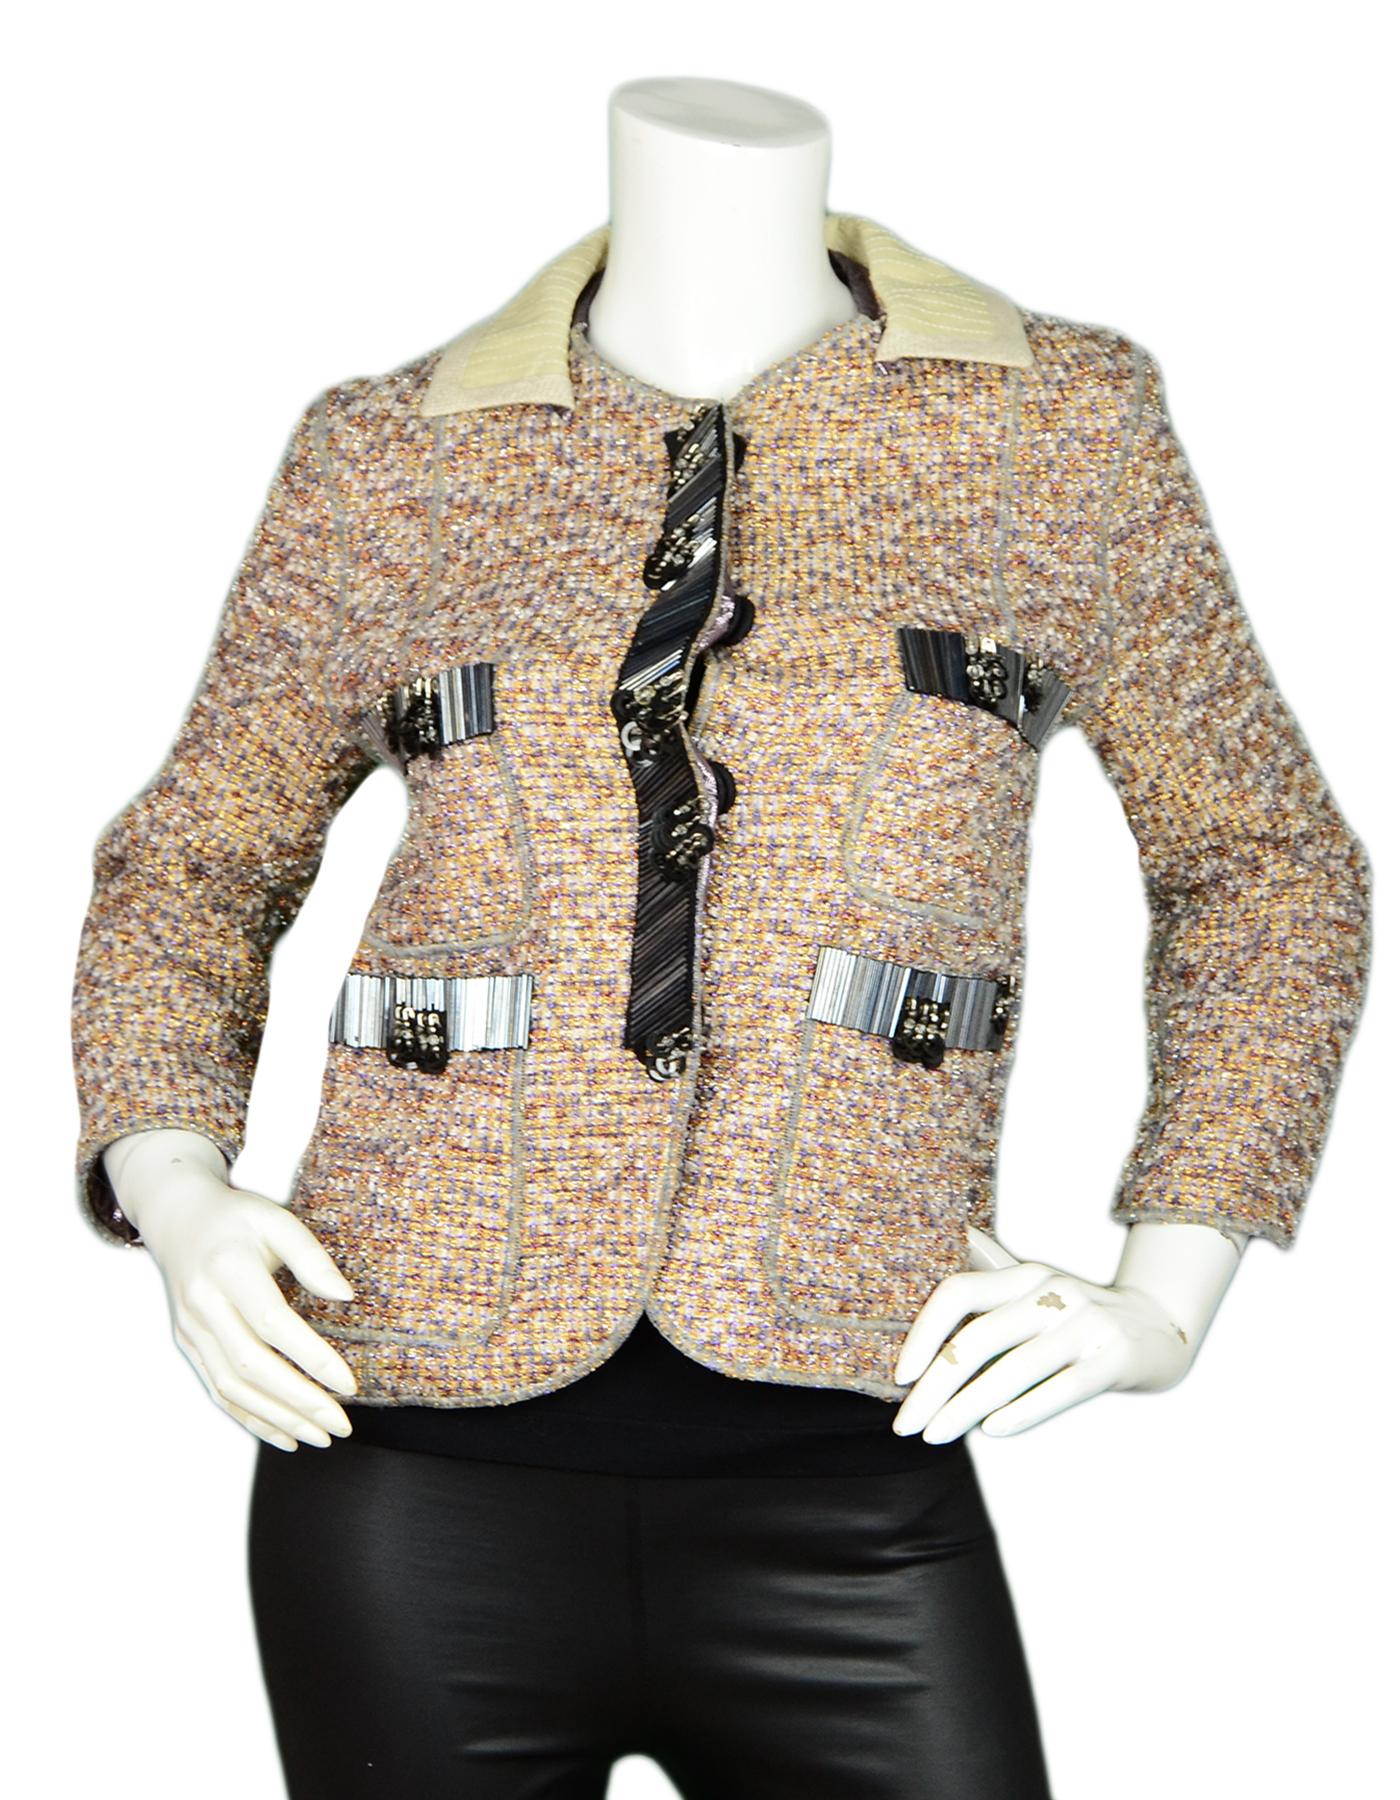 Marc Jacobs Metallic Tweed Jacket with Black Beaded Trim sz 2

Made In: USA 
Color: Multi-color
Materials: 43% Polyester, 36% Nylon, 2% Rayon
Trim: 100% Leather
Lining: 64% Silk, 36% Polyester
Opening/Closure: Front snap buttons
Overall Condition: